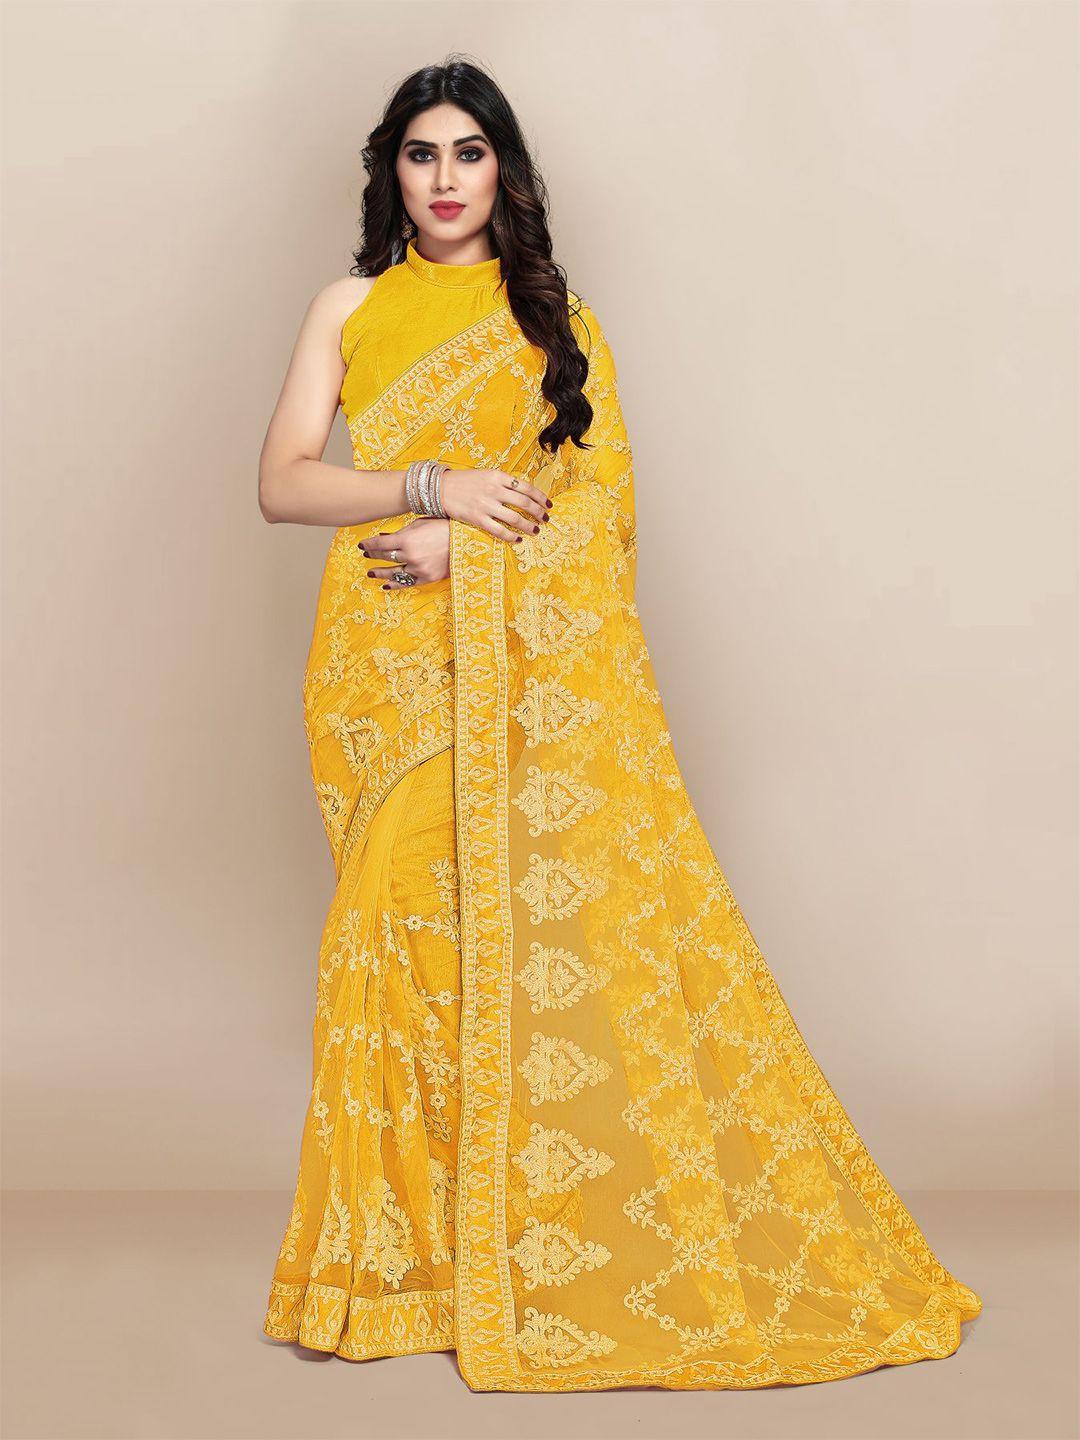 vairagee yellow floral embroidered net saree